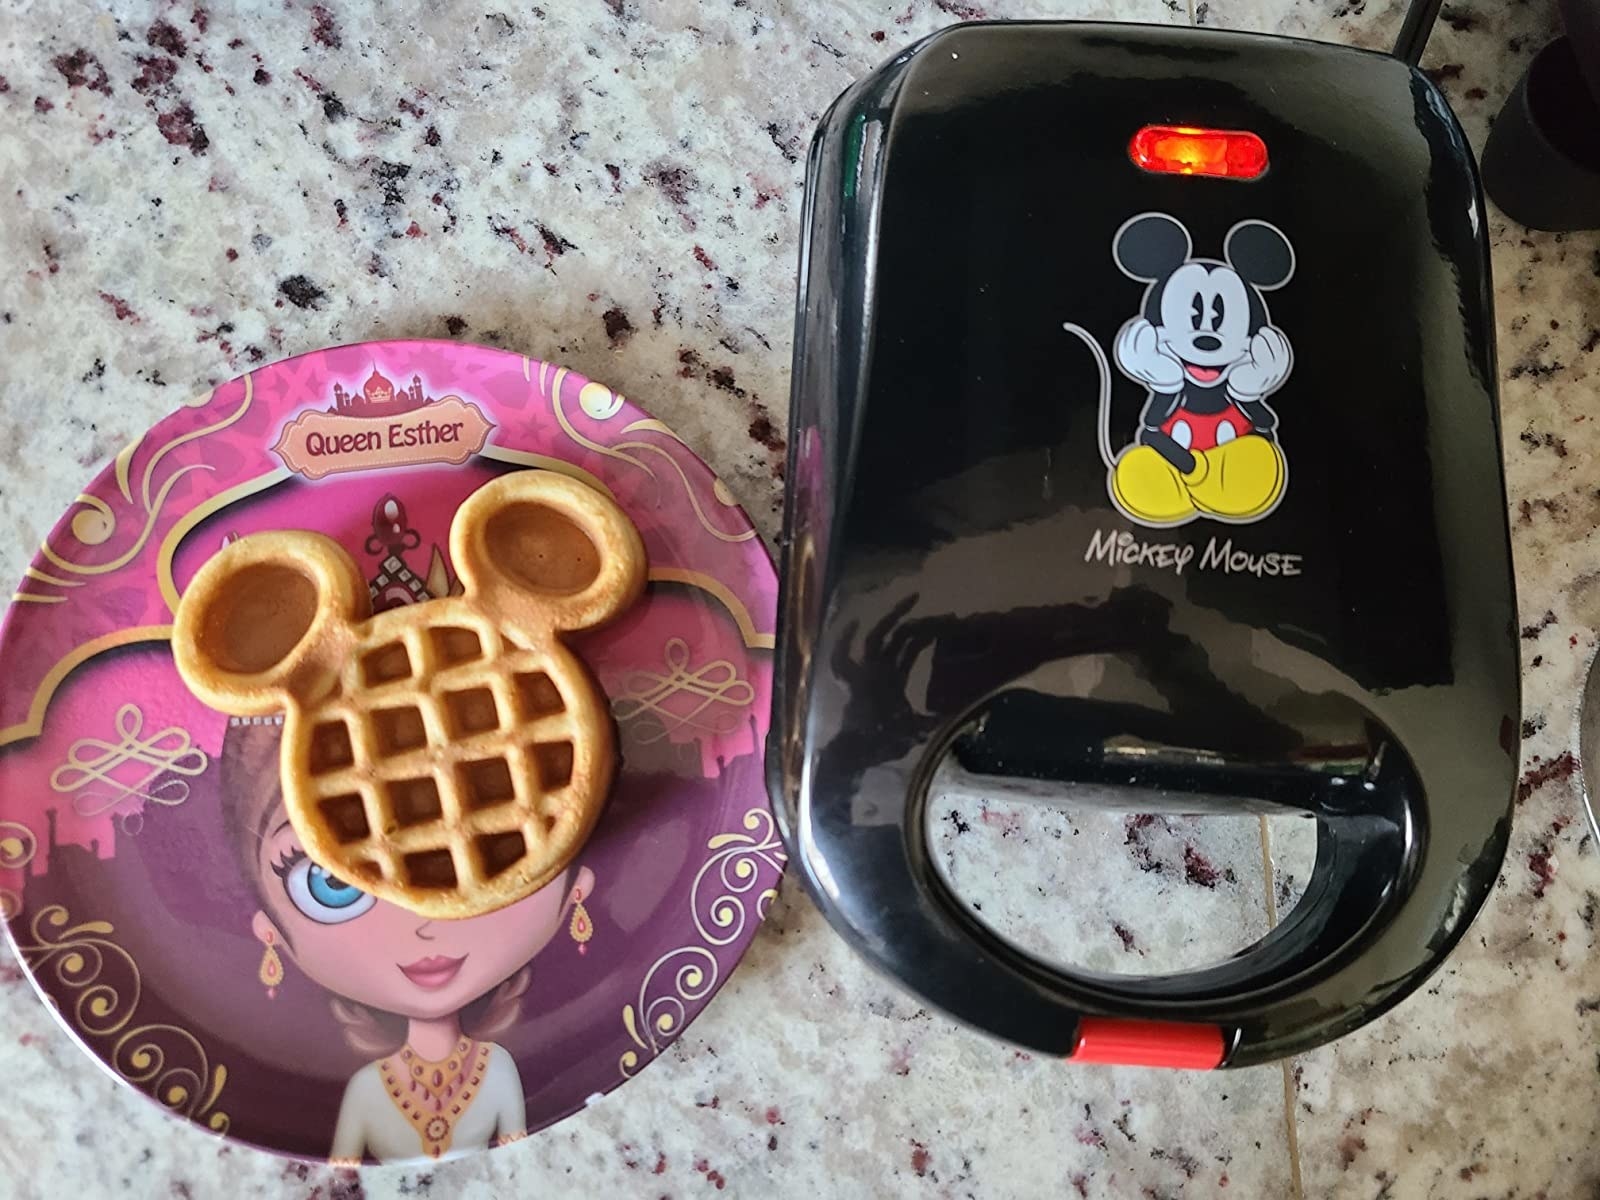 Plate with Mickey-shaped waffle next to waffle maker